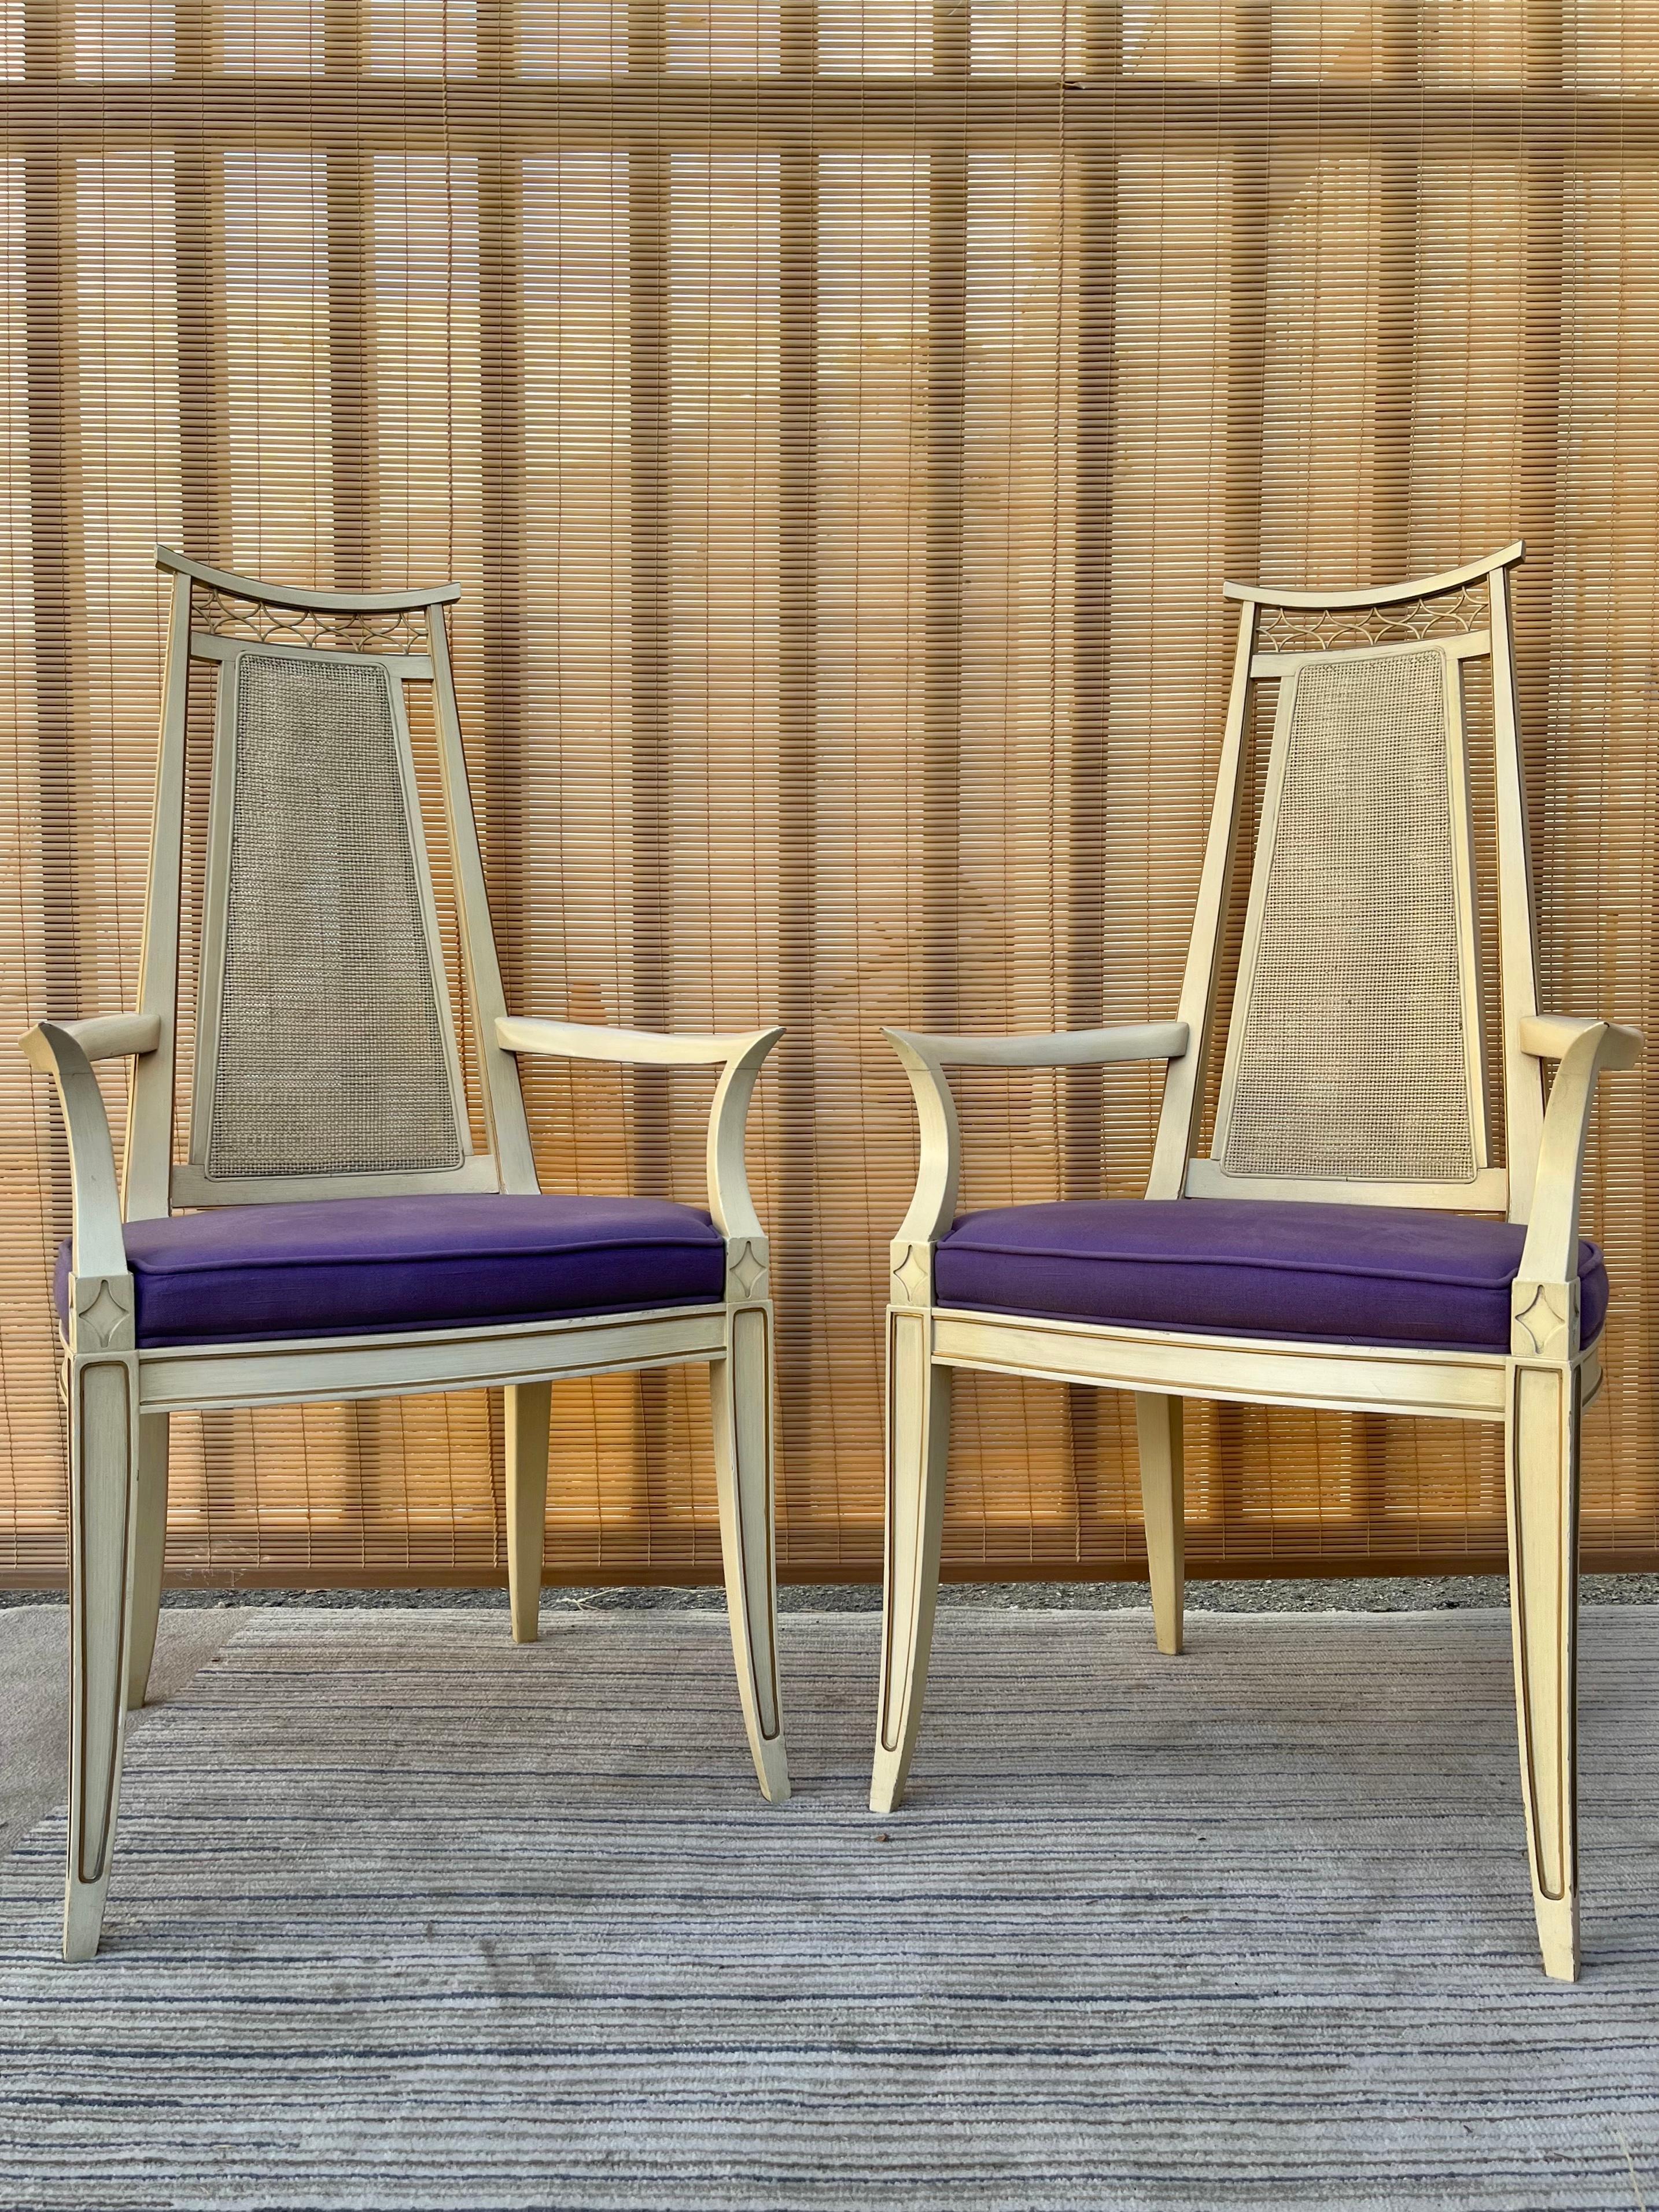 A Set of two Vintage Mid-Century / Hollywood Regency Walnut Arm Side / Dining Chairs by Dixon Powdermaker Jacksonville Florida. Circa 1960s
Feature a sleek Mid Century design with caning backs, a pagoda Chinoiserie inspired detail, the original